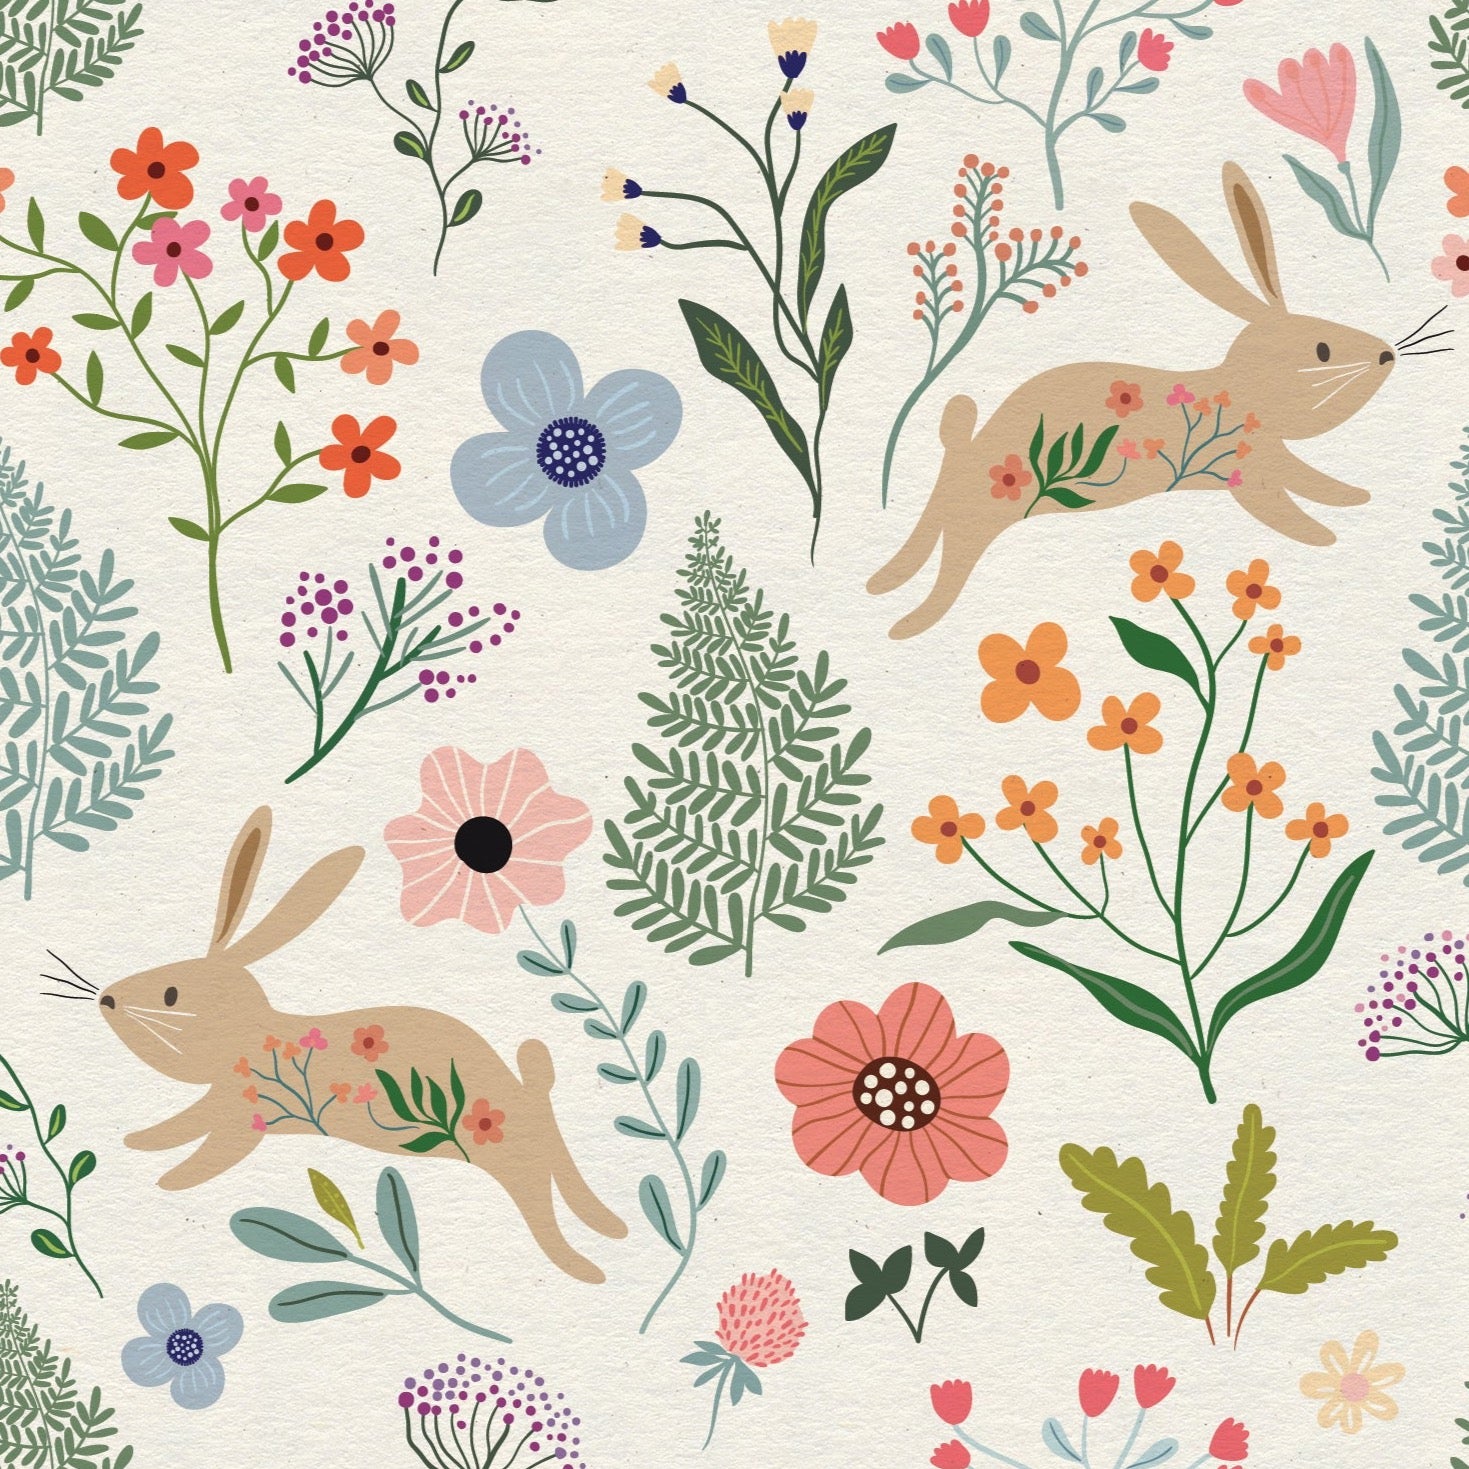 Close-up detail of the Colourful Spring Bunnies Wallpaper showcasing the intricate design with leaping rabbits, blooming flowers, and lush leaves in soft pastel colors, perfect for adding a charming and lively touch to any child's room.